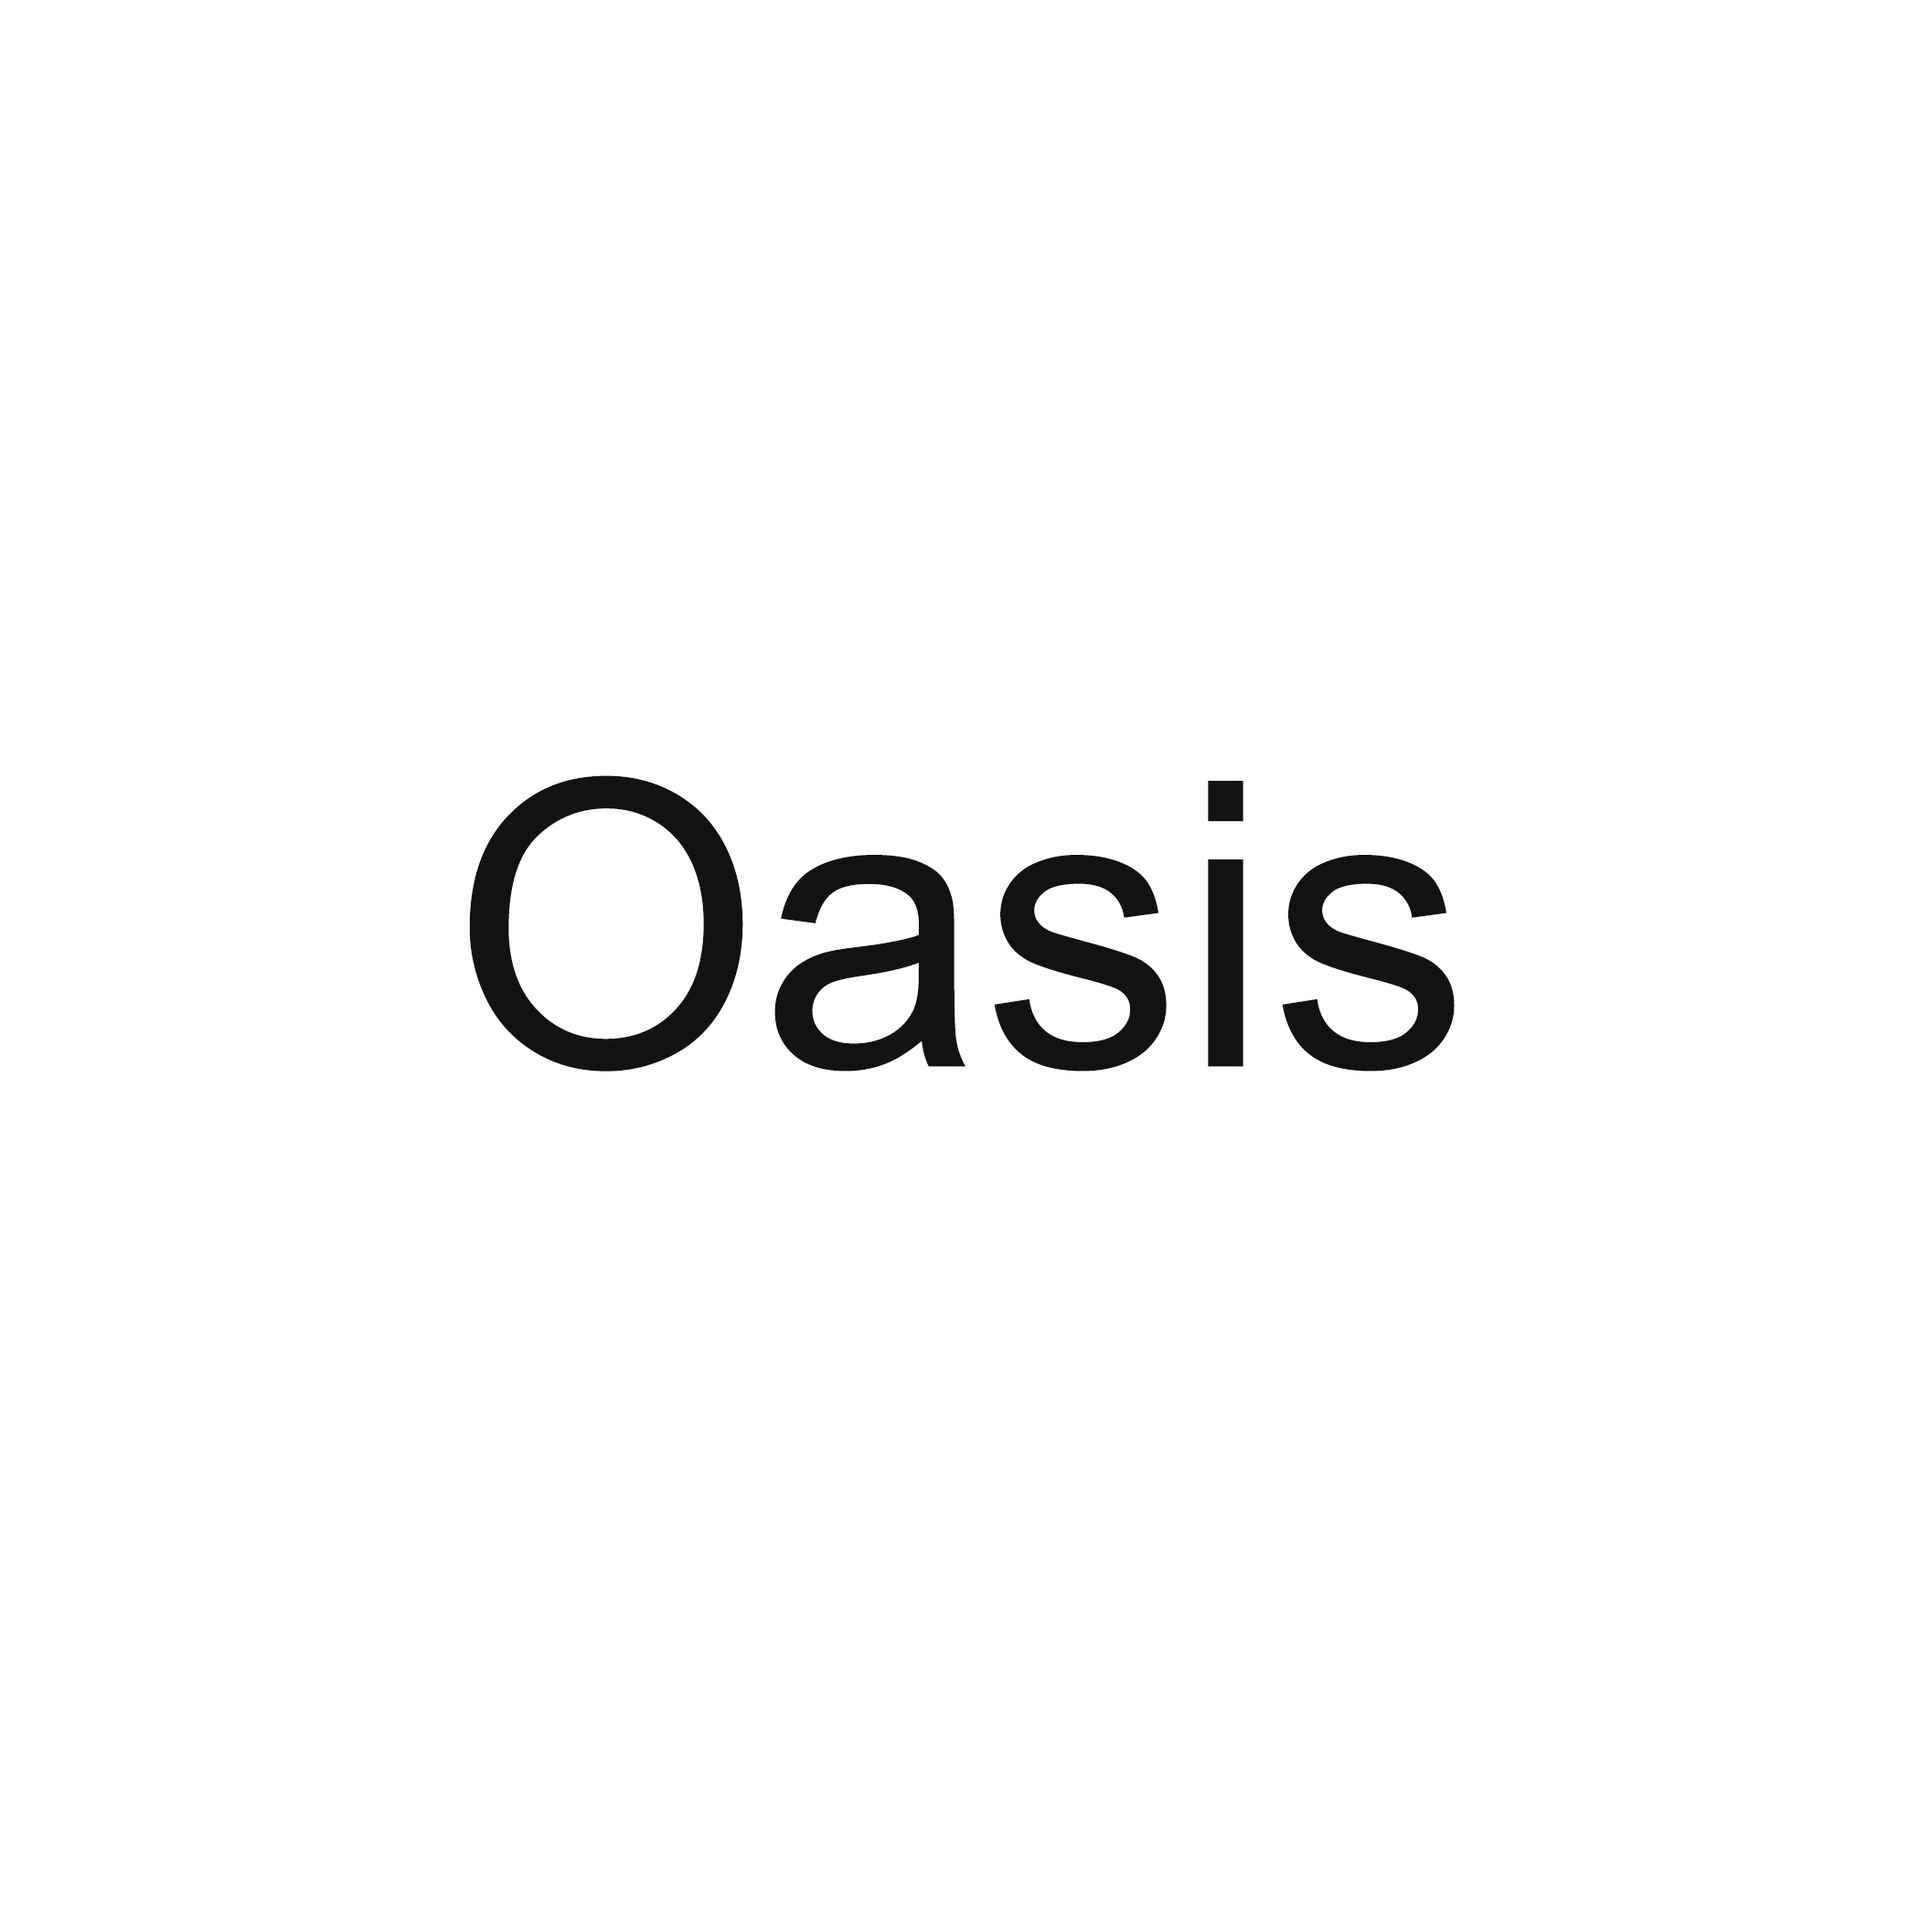 Product Brand: Oasis